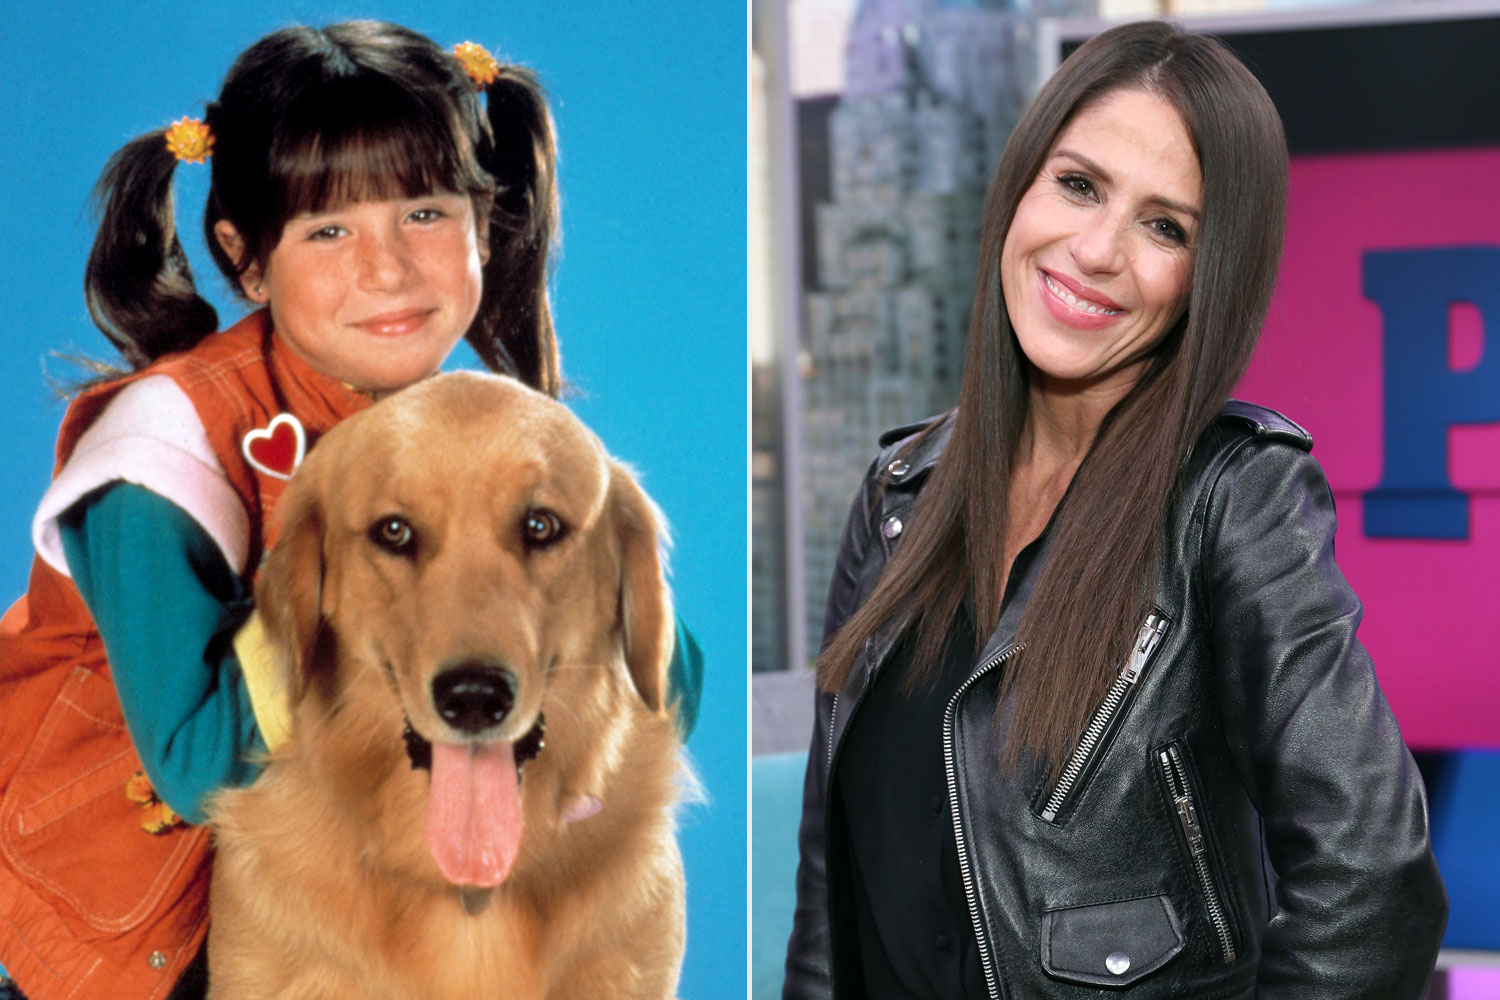 The Punky Brewster Revived But On Another Platform!